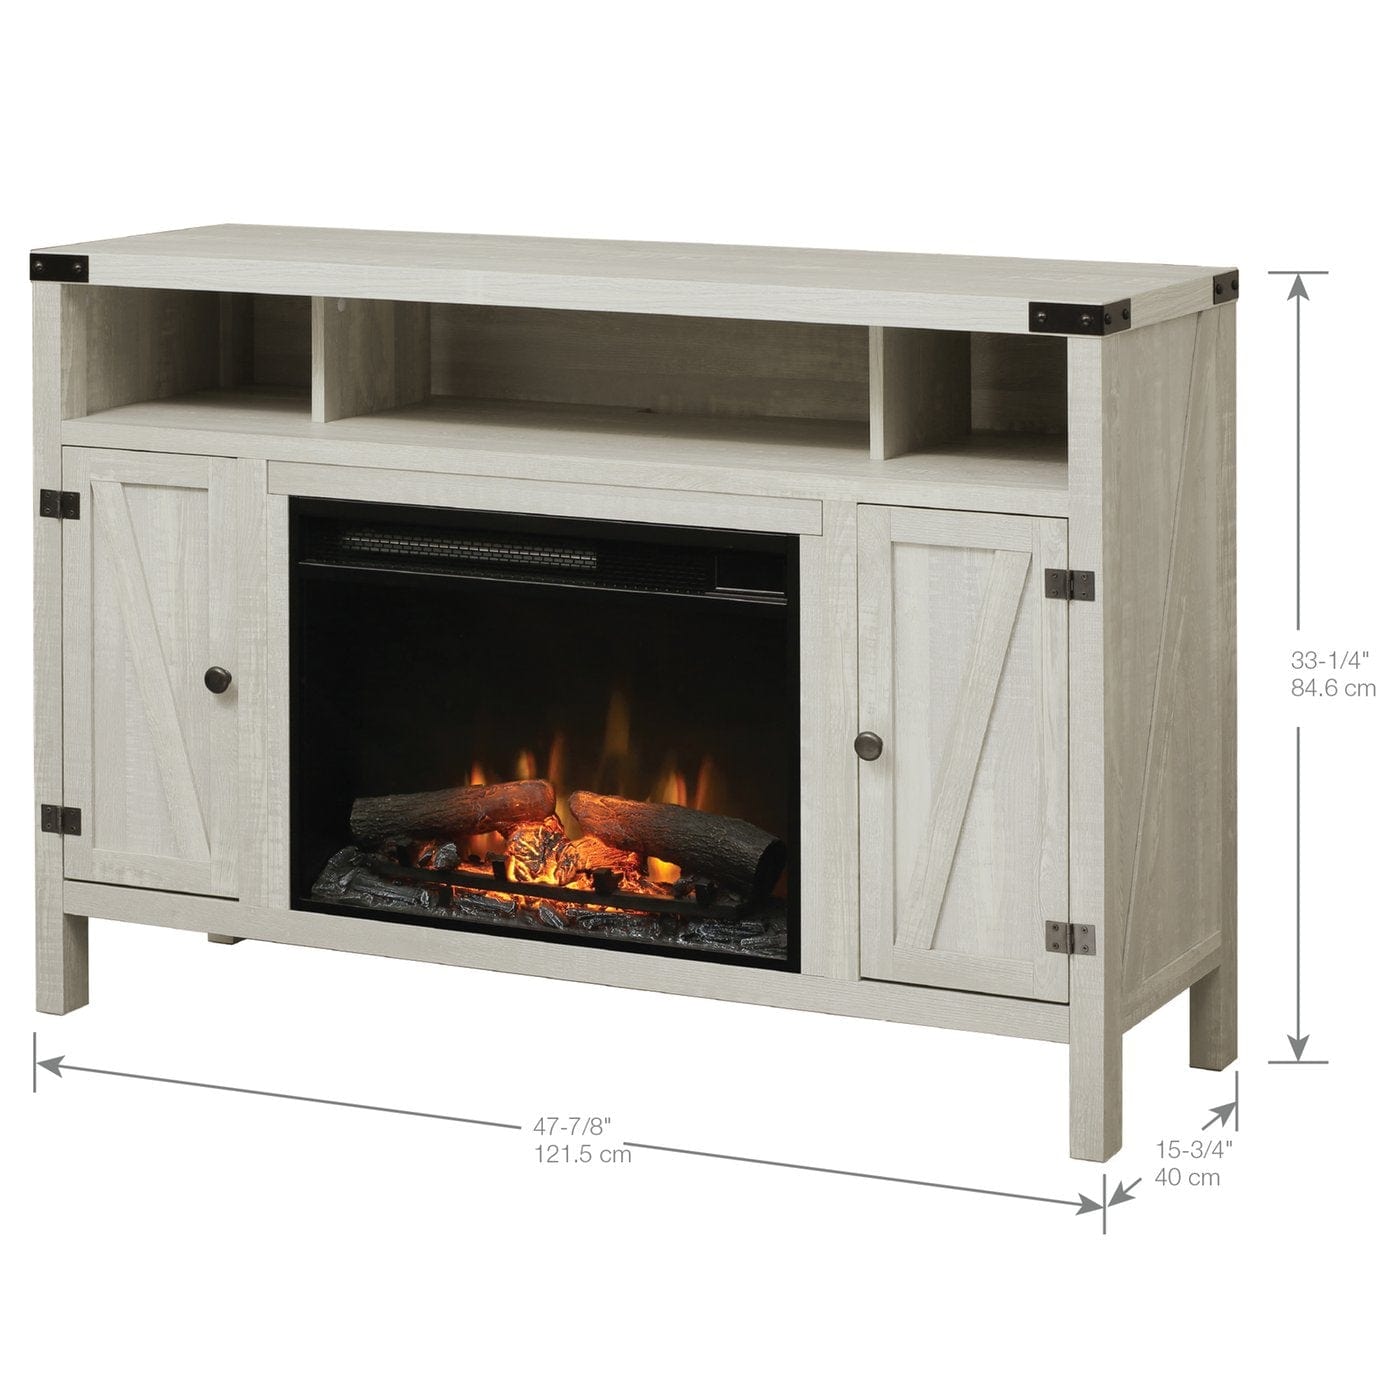 StarWood Fireplaces - Dimplex Sadie Media Console Electric Fireplace With Logs -